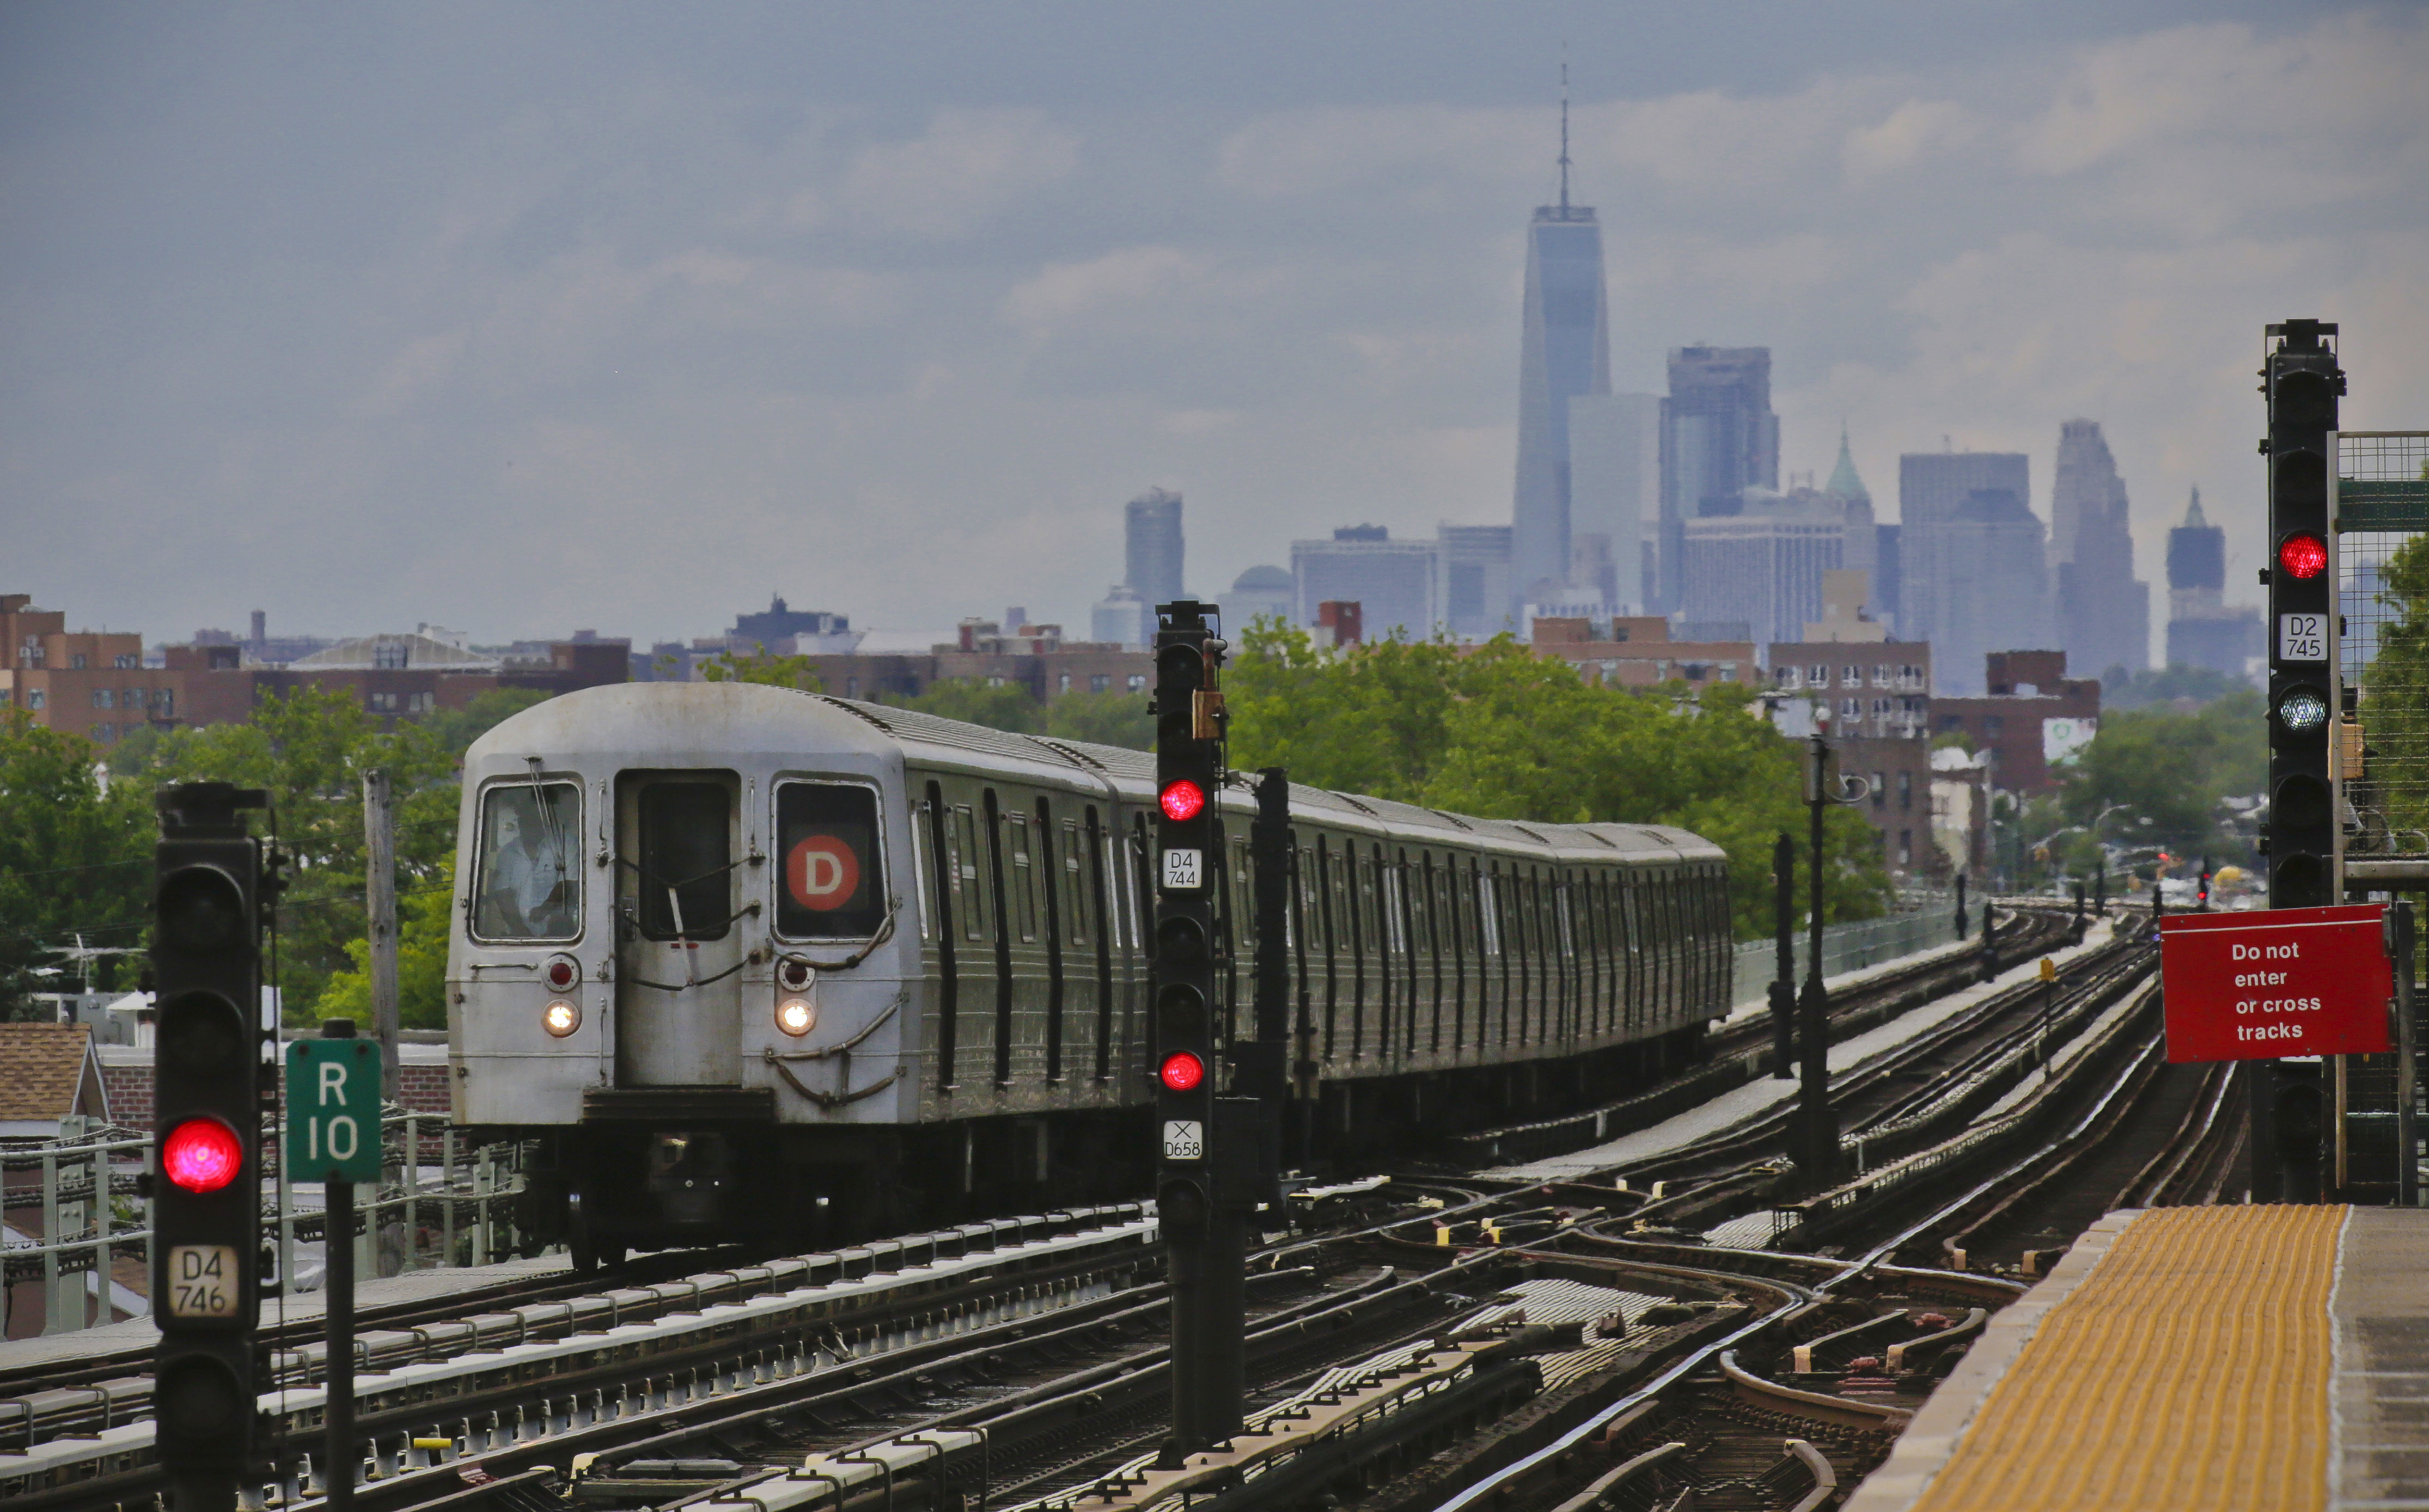 FILE - A subway approaches an above ground station in the Brooklyn borough of New York with the New York City skyline in the background, June 21, 2017. The ground rumbled Friday, April 5, 2024, beneath New York City, home to famous skyscrapers like the Empire State Building and One World Trade Center. Though buildings that can reach above 100 stories might seem especially vulnerable to earthquakes, engineering experts say they're built with enough flexibility to withstand them.(AP Photo/Bebeto Matthews, File)